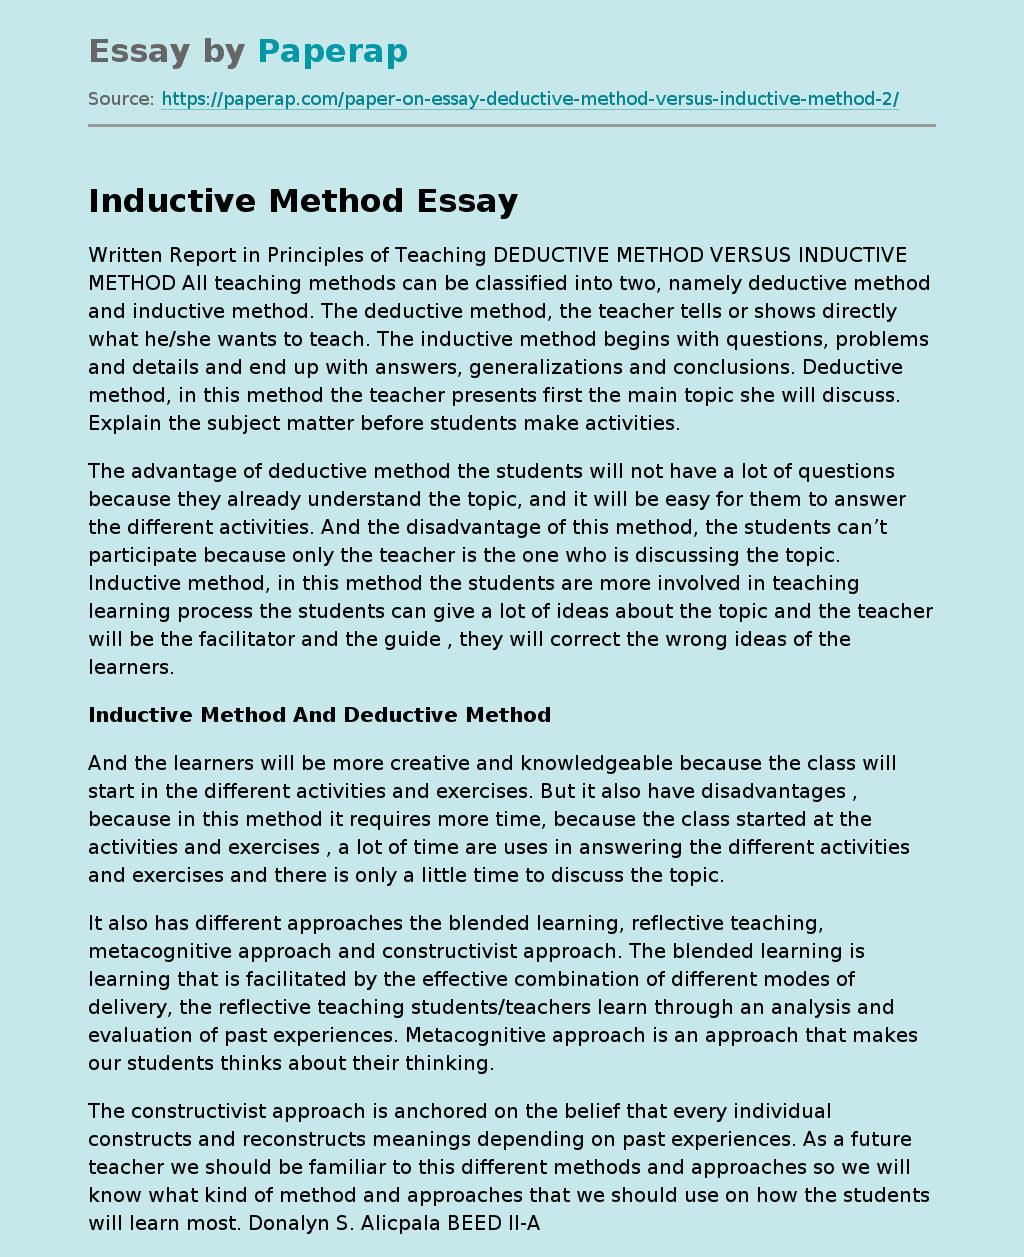 inductive essay examples